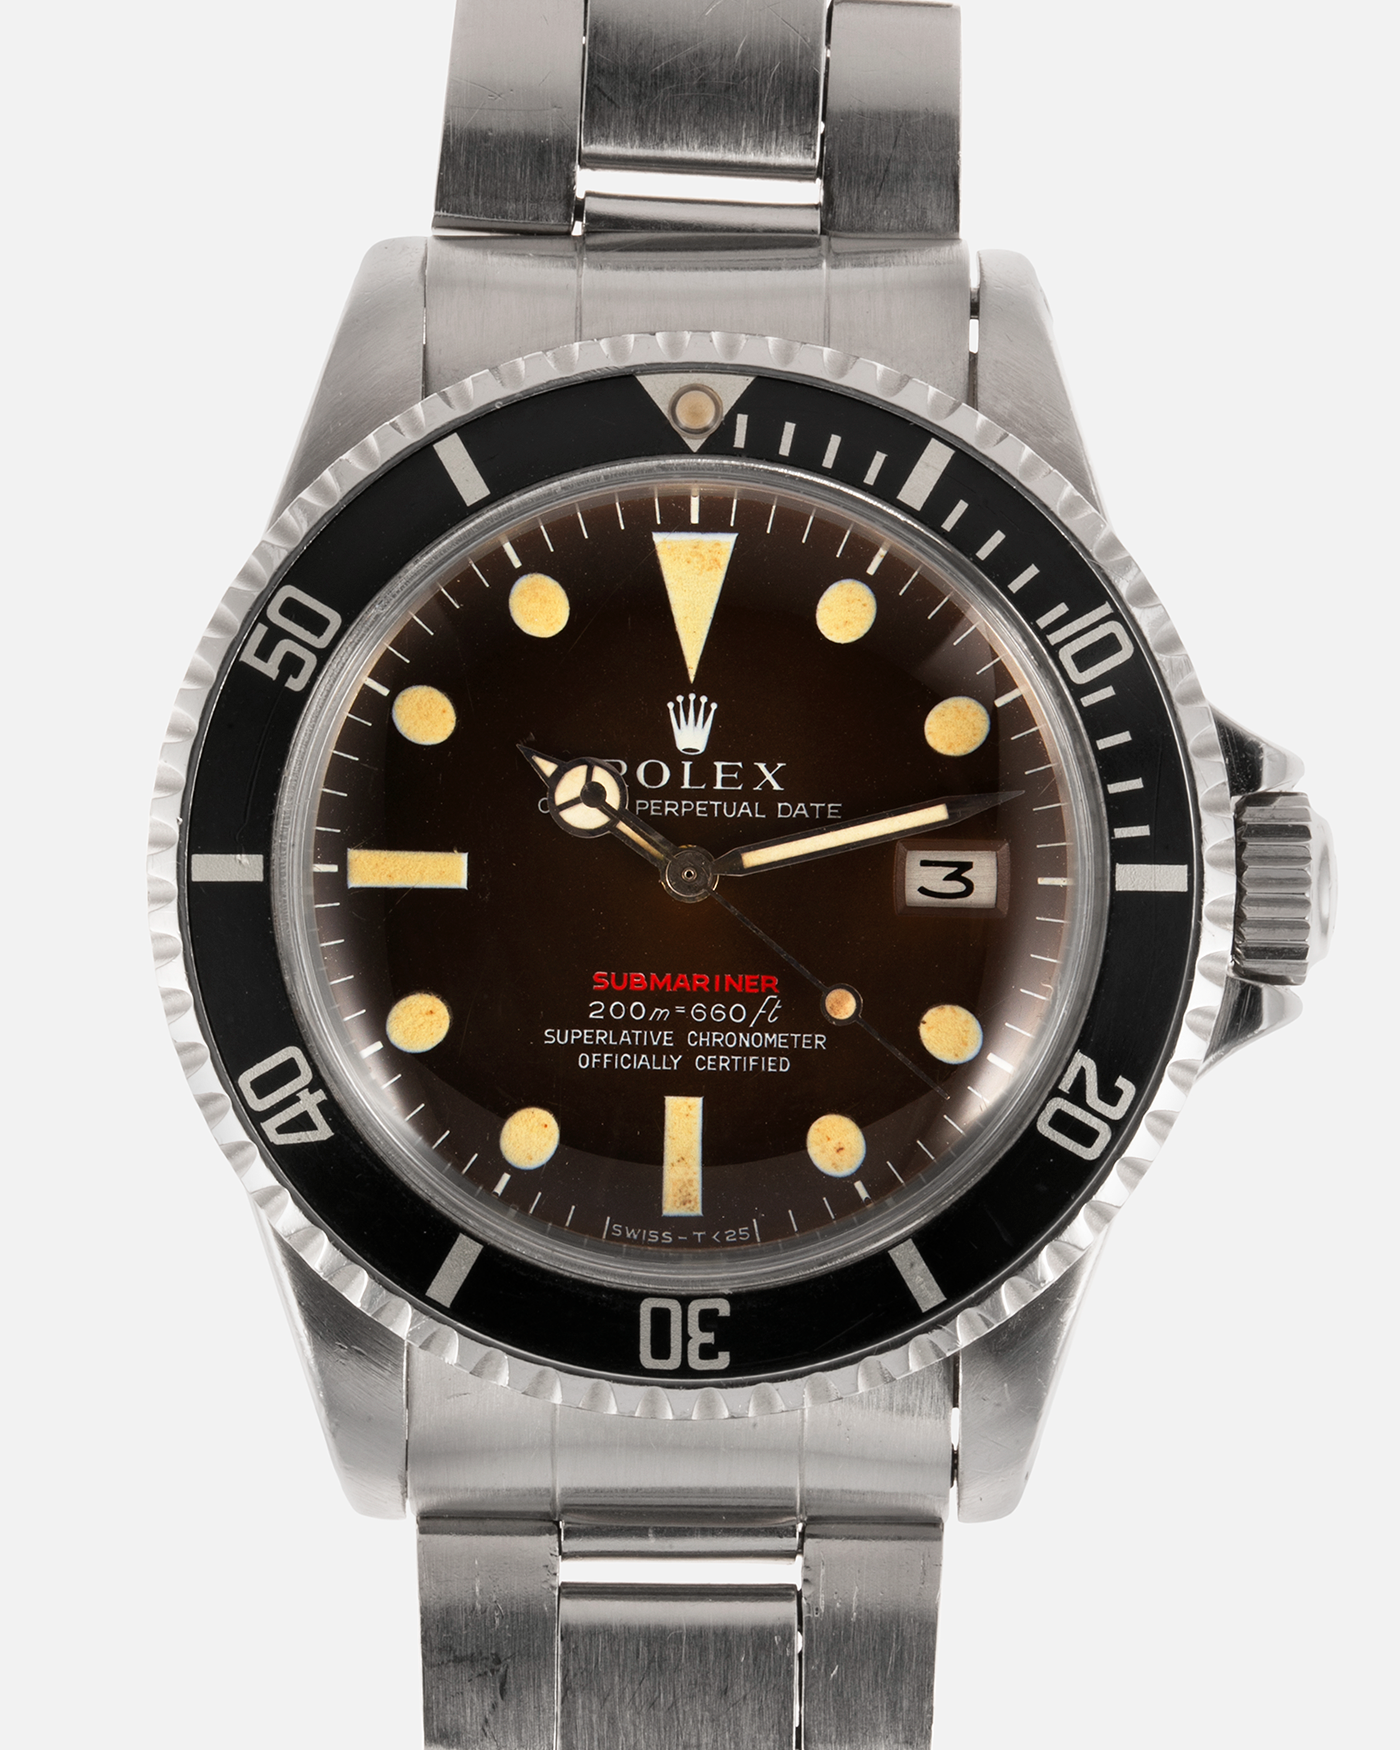 Brand: Rolex Model: Submariner Reference Number: 1680 ‘Red’ Year: 1969 Serail Number: 2.2 Mil Material: Stainless Steel Movement: Cal. 1570 Case Diameter: 40mm Lug Width: 20mm Bracelet/Strap: Rolex 9315 Oyster bracelet with 380 endlinks. 